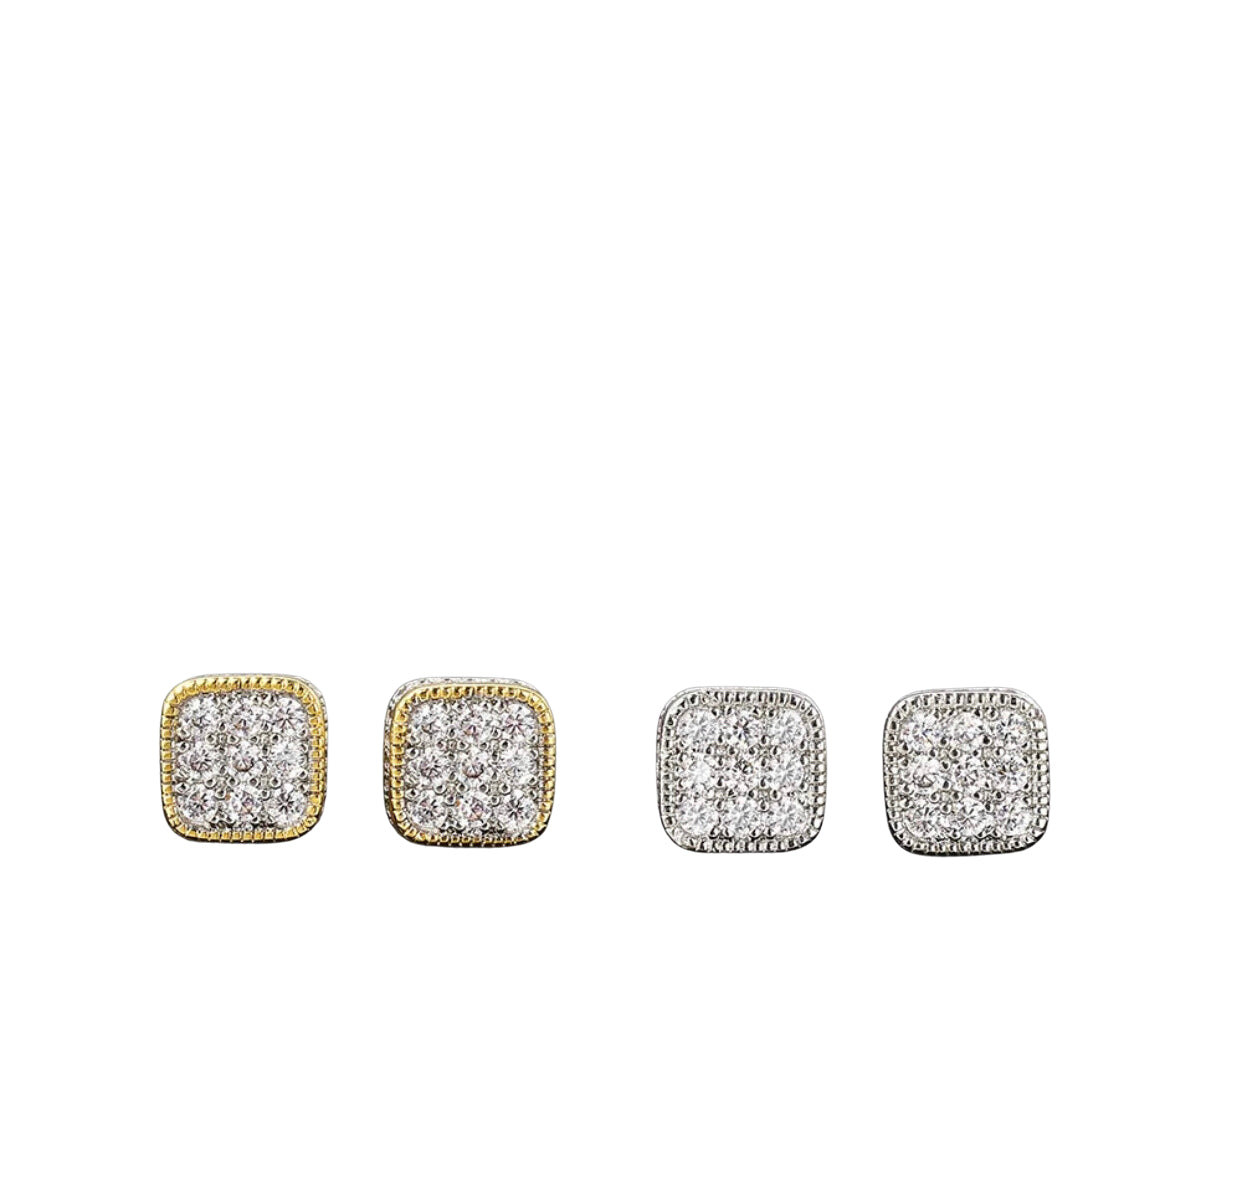 Rounded Square Stud Earrings for Men Hip Hop Iced Out Zirconia Jewelry